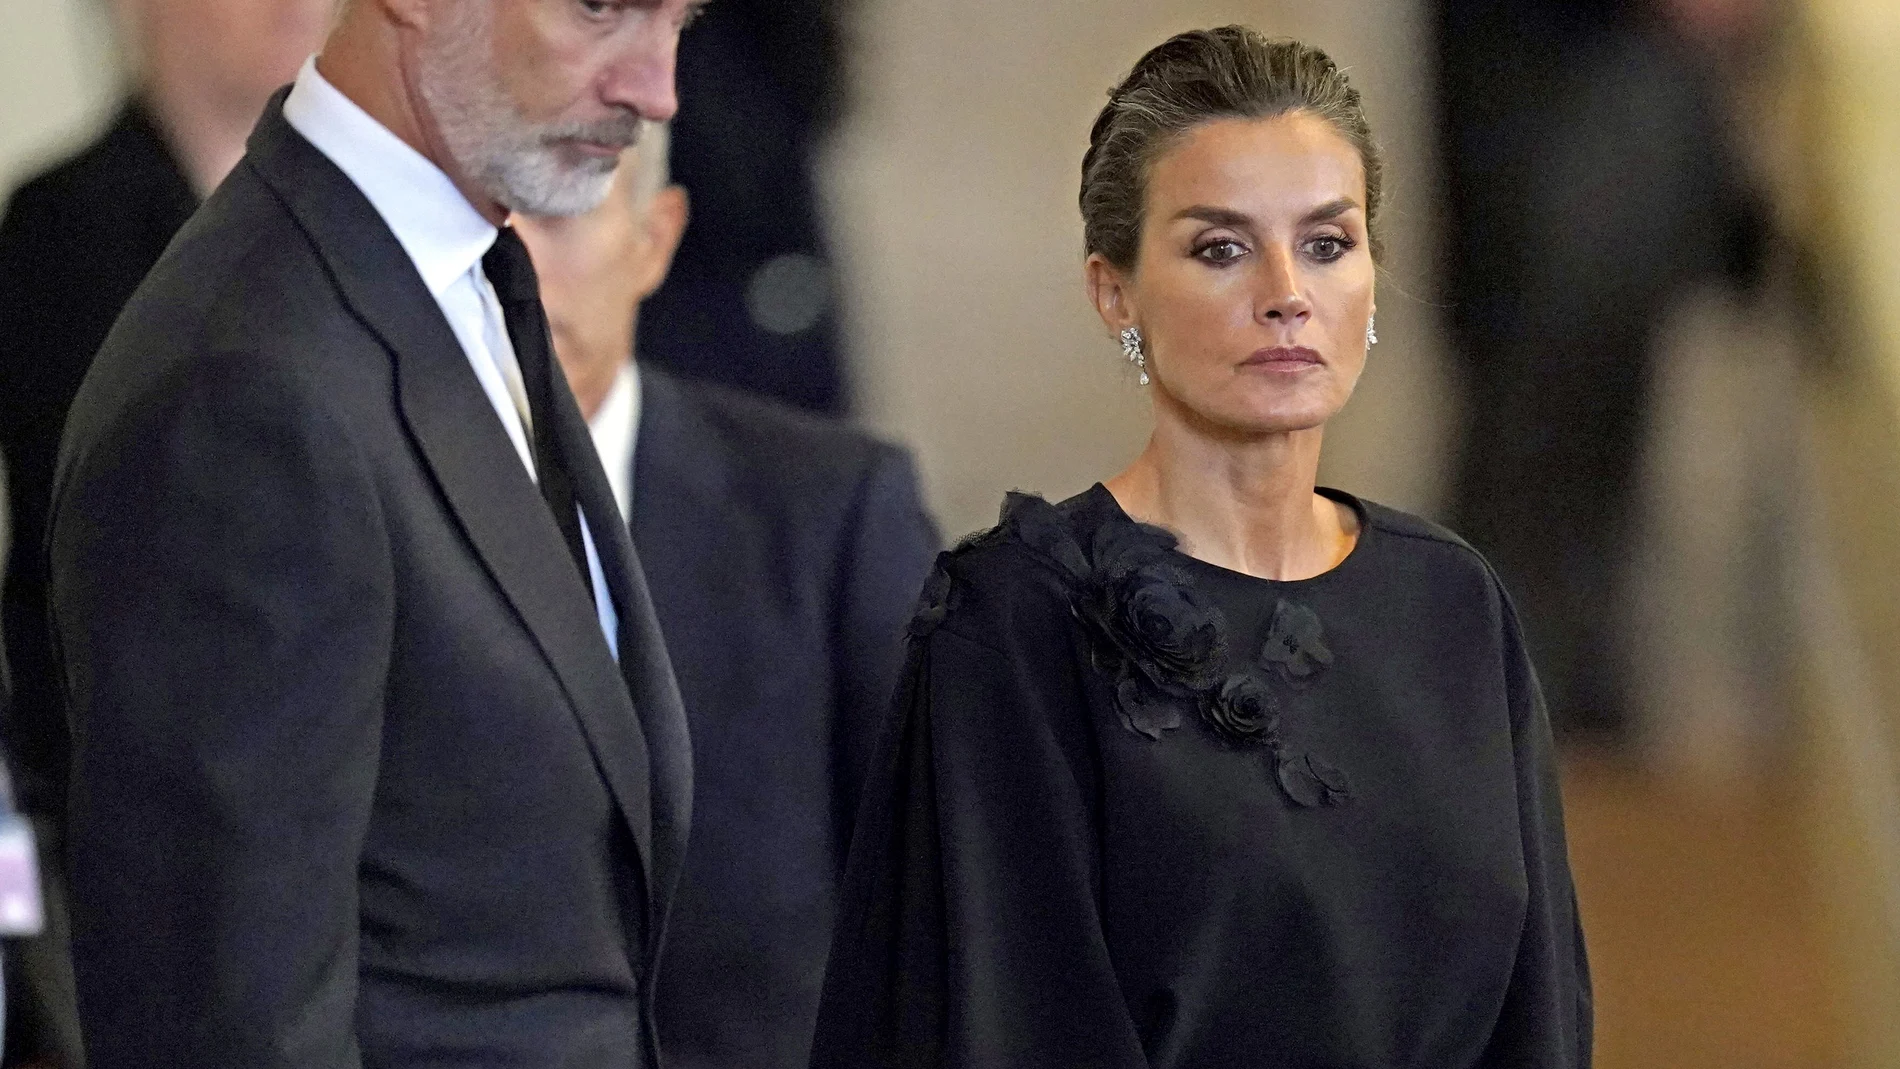 King Felipe VI and Queen Letizia of Spain look at the coffin of Queen Elizabeth II as it lies in state on the catafalque in Westminster Hall, in London, Sunday, Sept. 18, 2022. ( Jacob King/Pool Photo via AP)